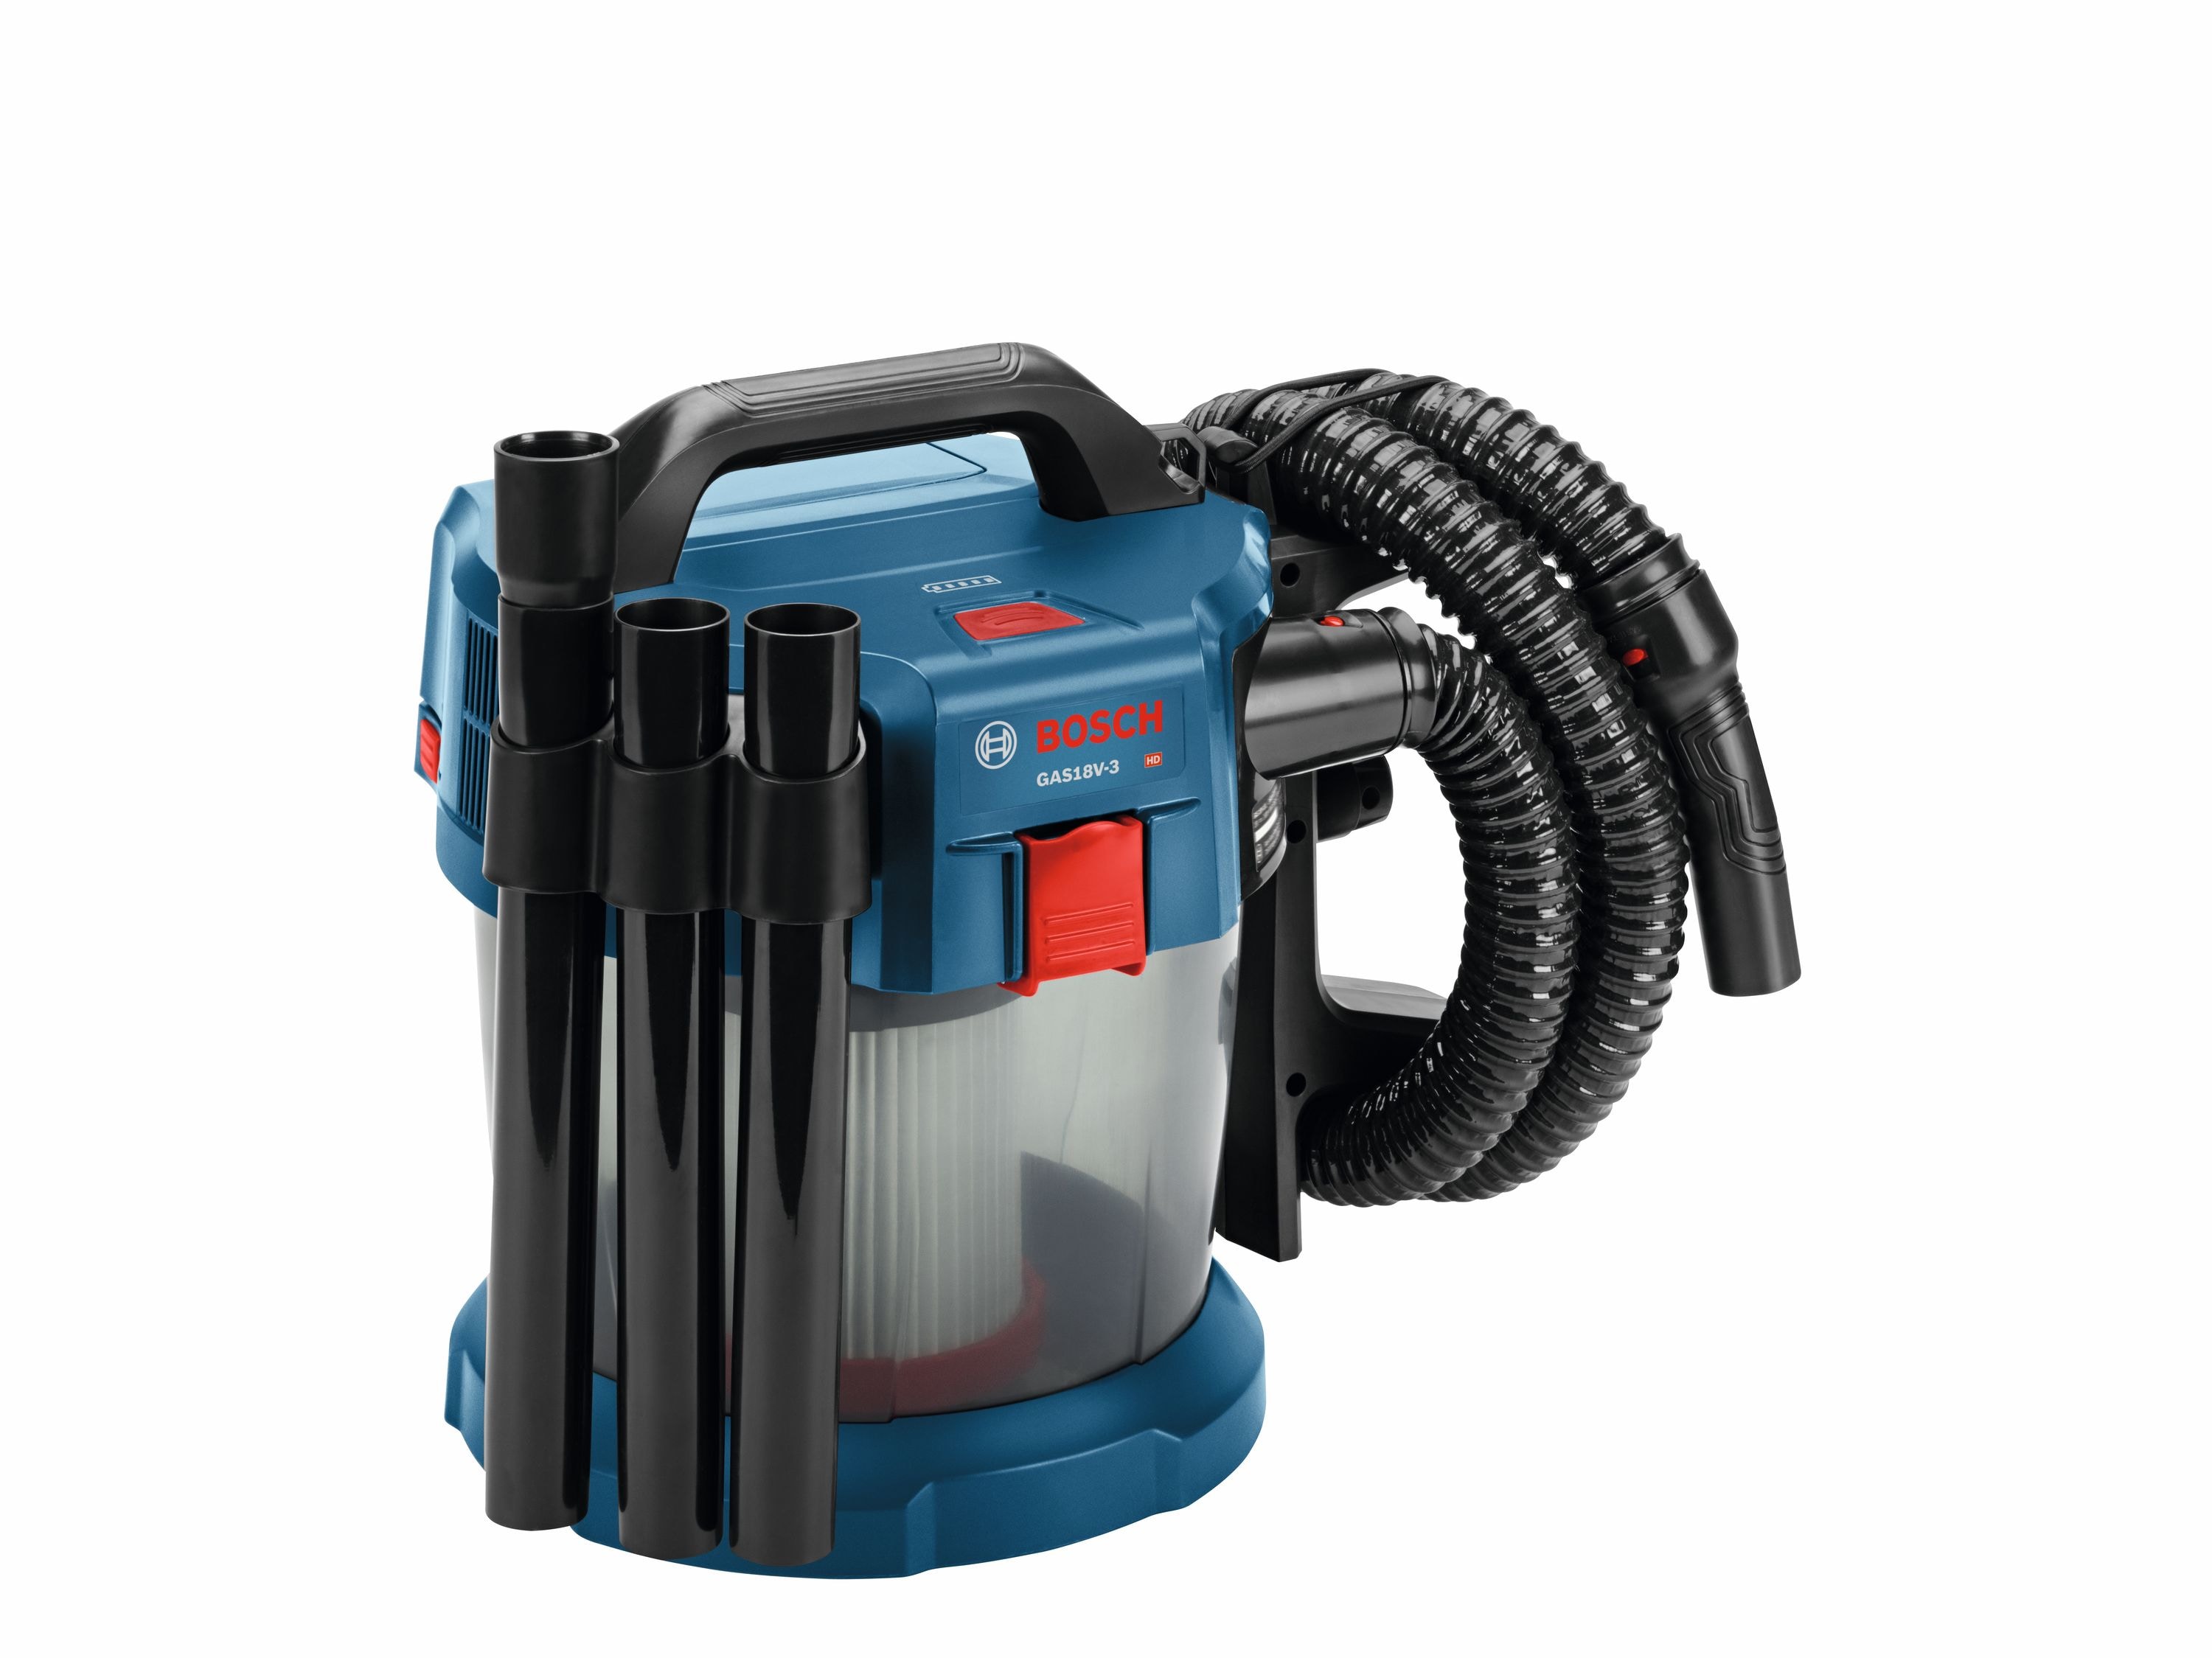 Bosch 2.6-Gallons 7-HP Cordless Wet/Dry Shop Vacuum (Bare Tool) in